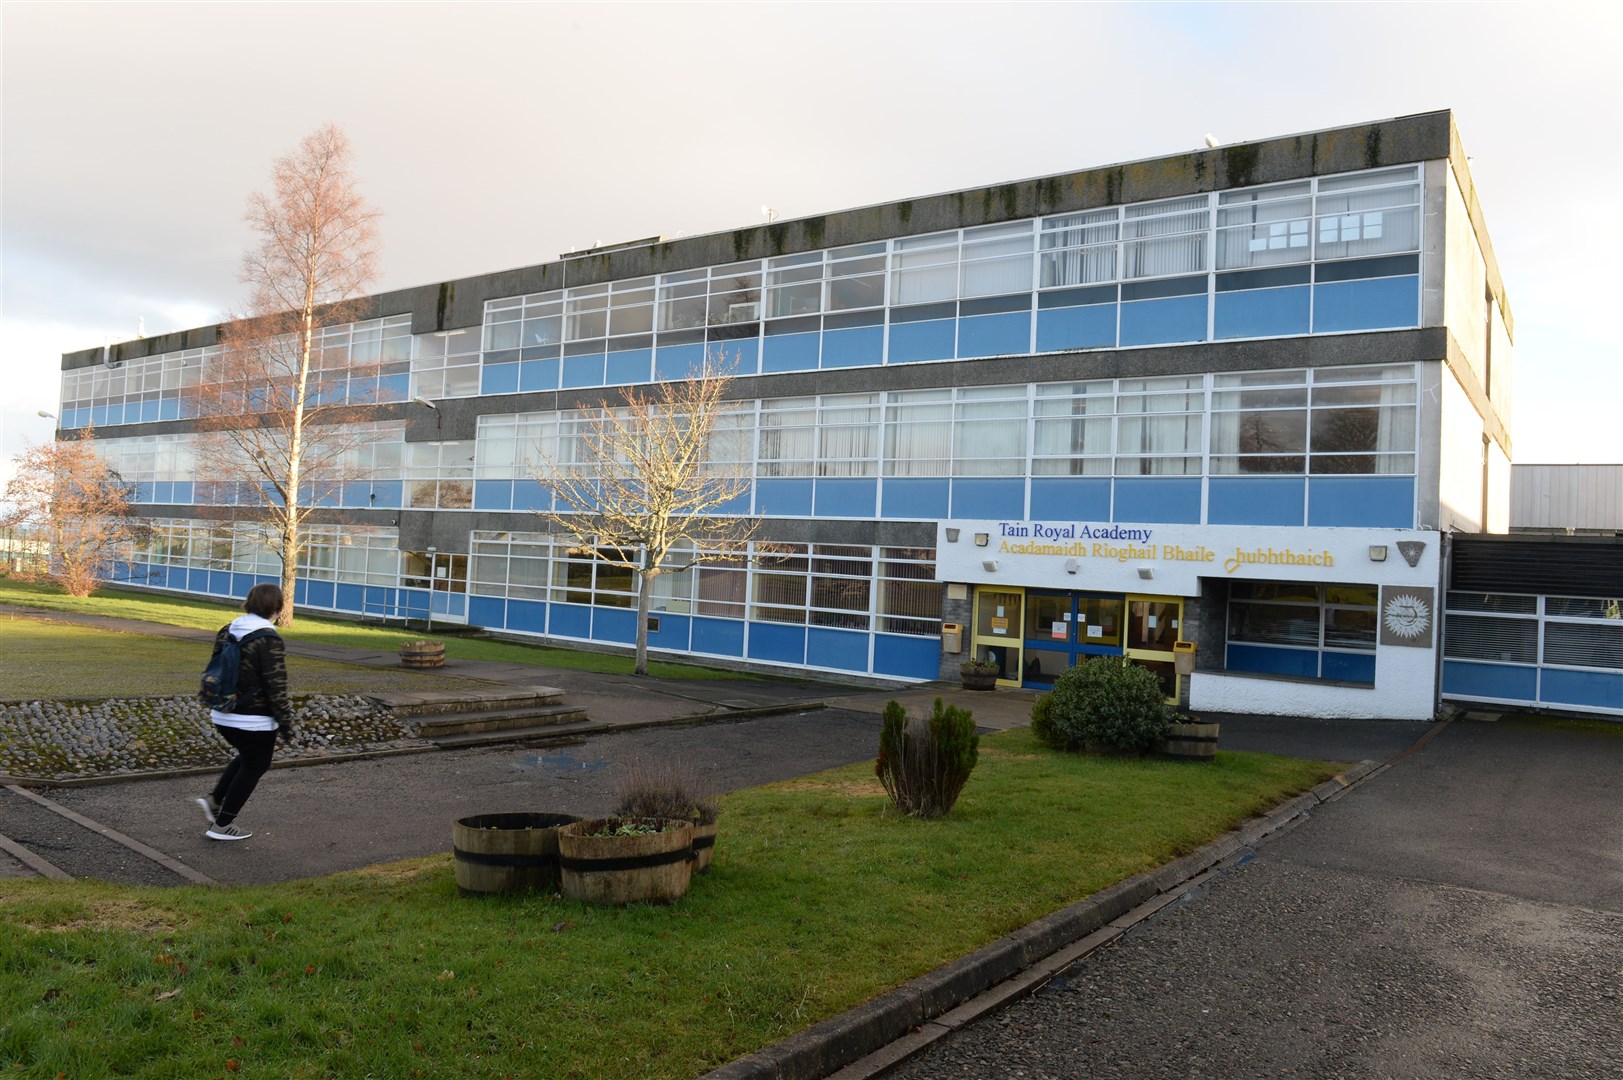 Parents and carers of pupils at Tain Royal Academy have been offered reassurance and given advice about what to do following a confirmed infection in an S2 pupil.